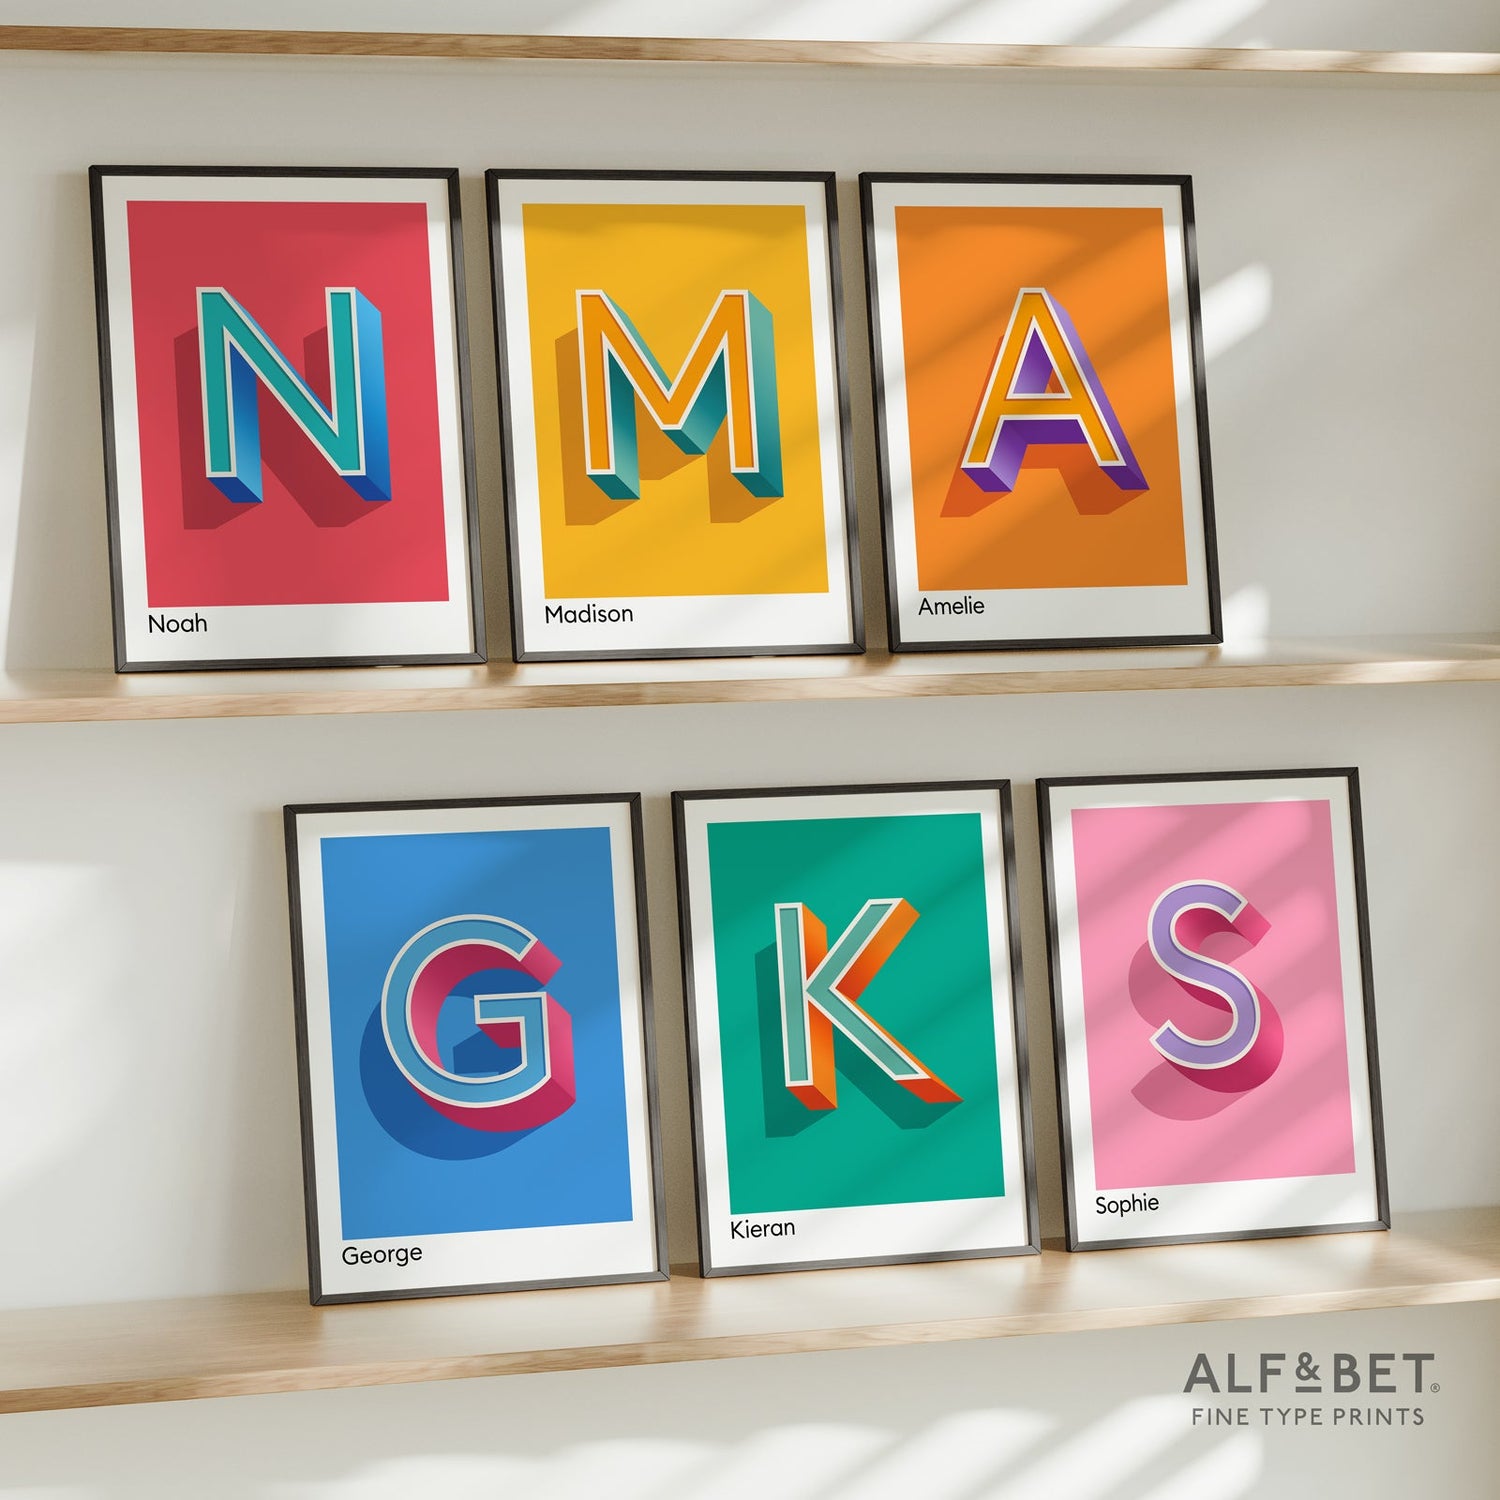 Our custom alphabet name letter prints make the perfect gift for family and friends and any special occasion. All designs from Alf & Bet Prints are available in 12 bold colours and 8 print sizes. This image shows a K letter print in Orange.